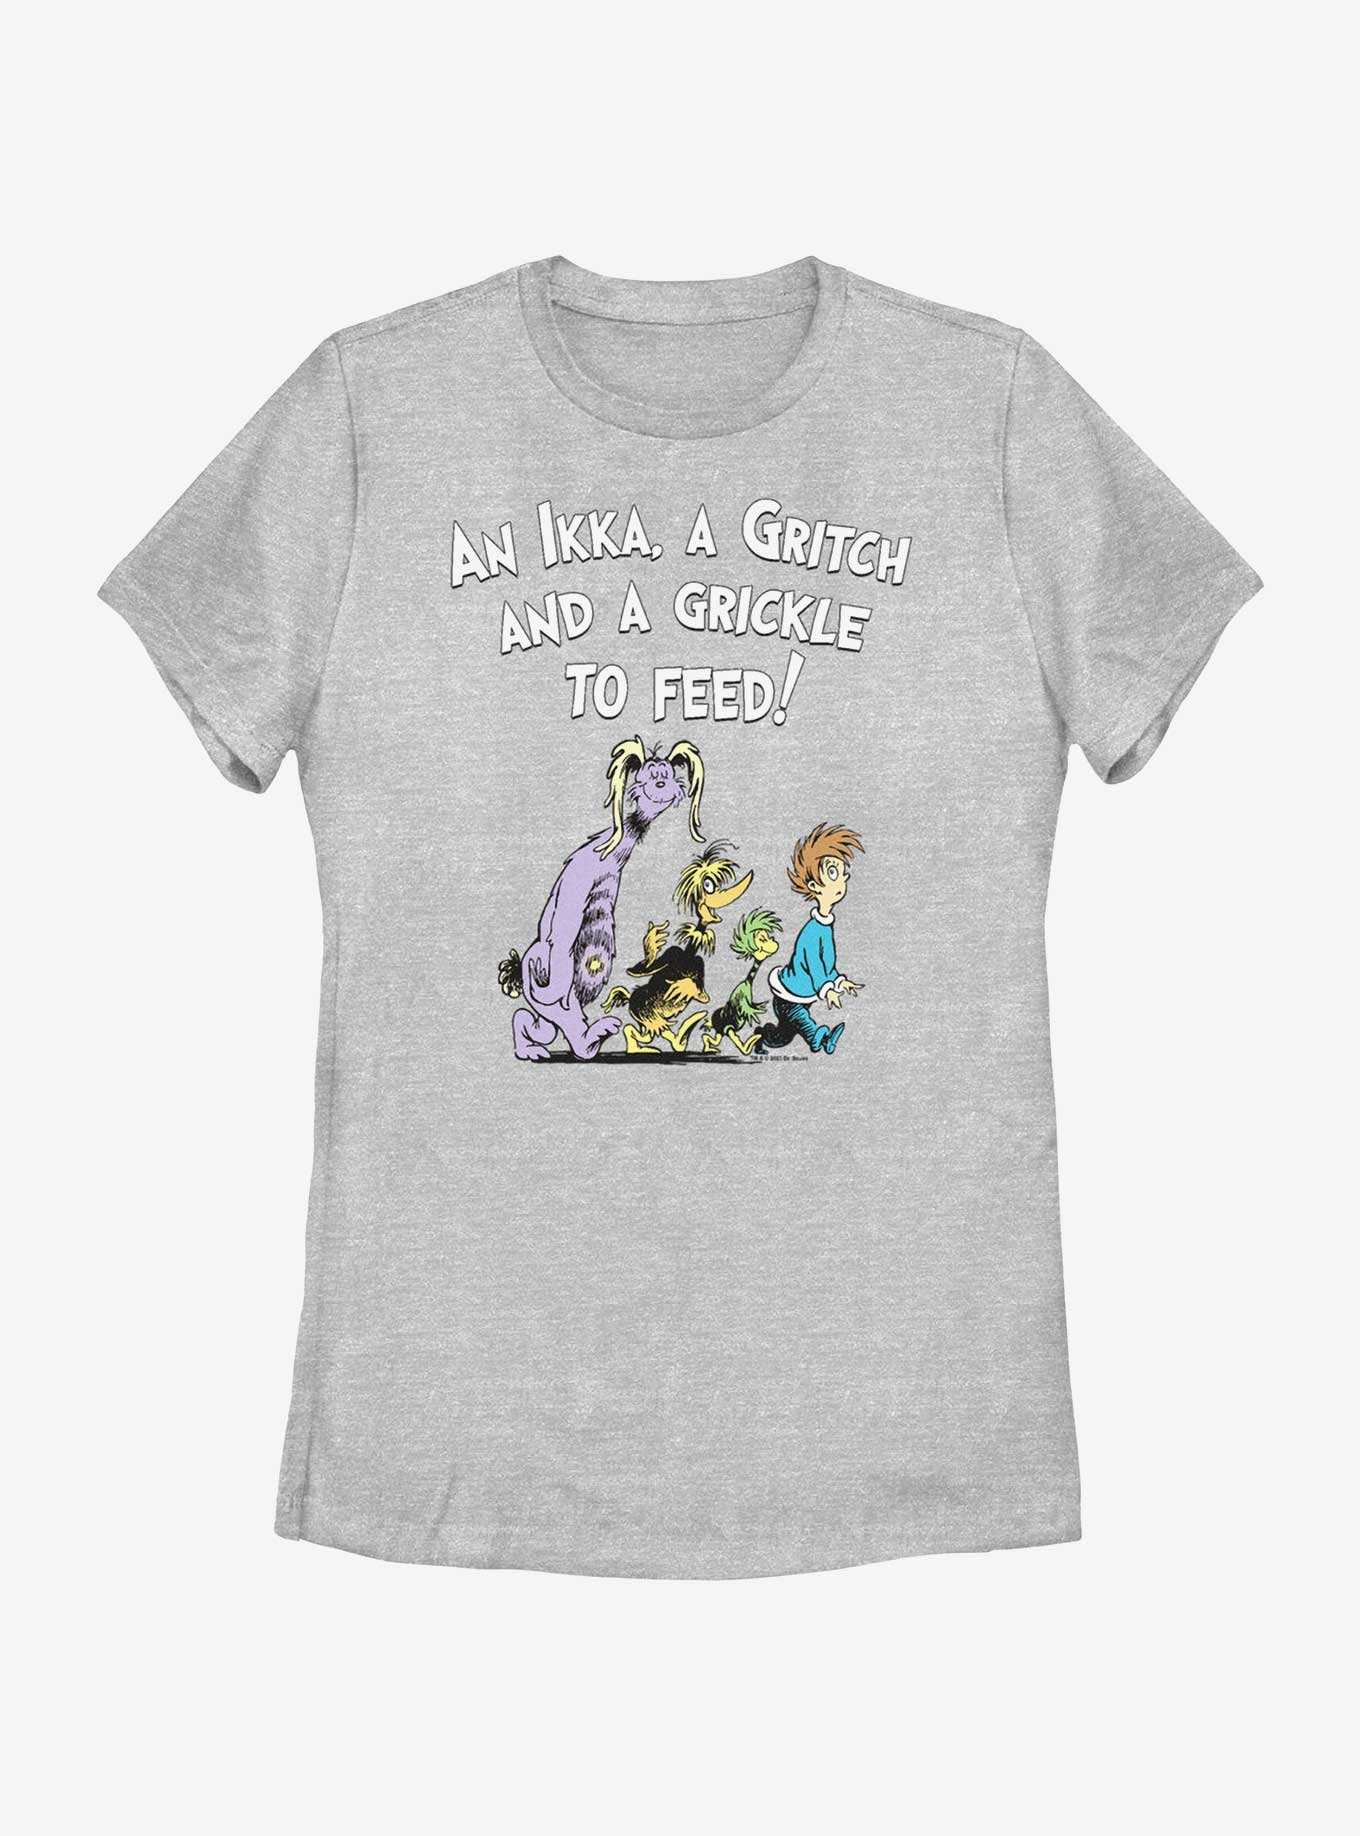 Dr. Seuss's The Bippolo Seed & Other Lost Stories Ikka Gritch Grickle To Feed Womens T-Shirt, , hi-res